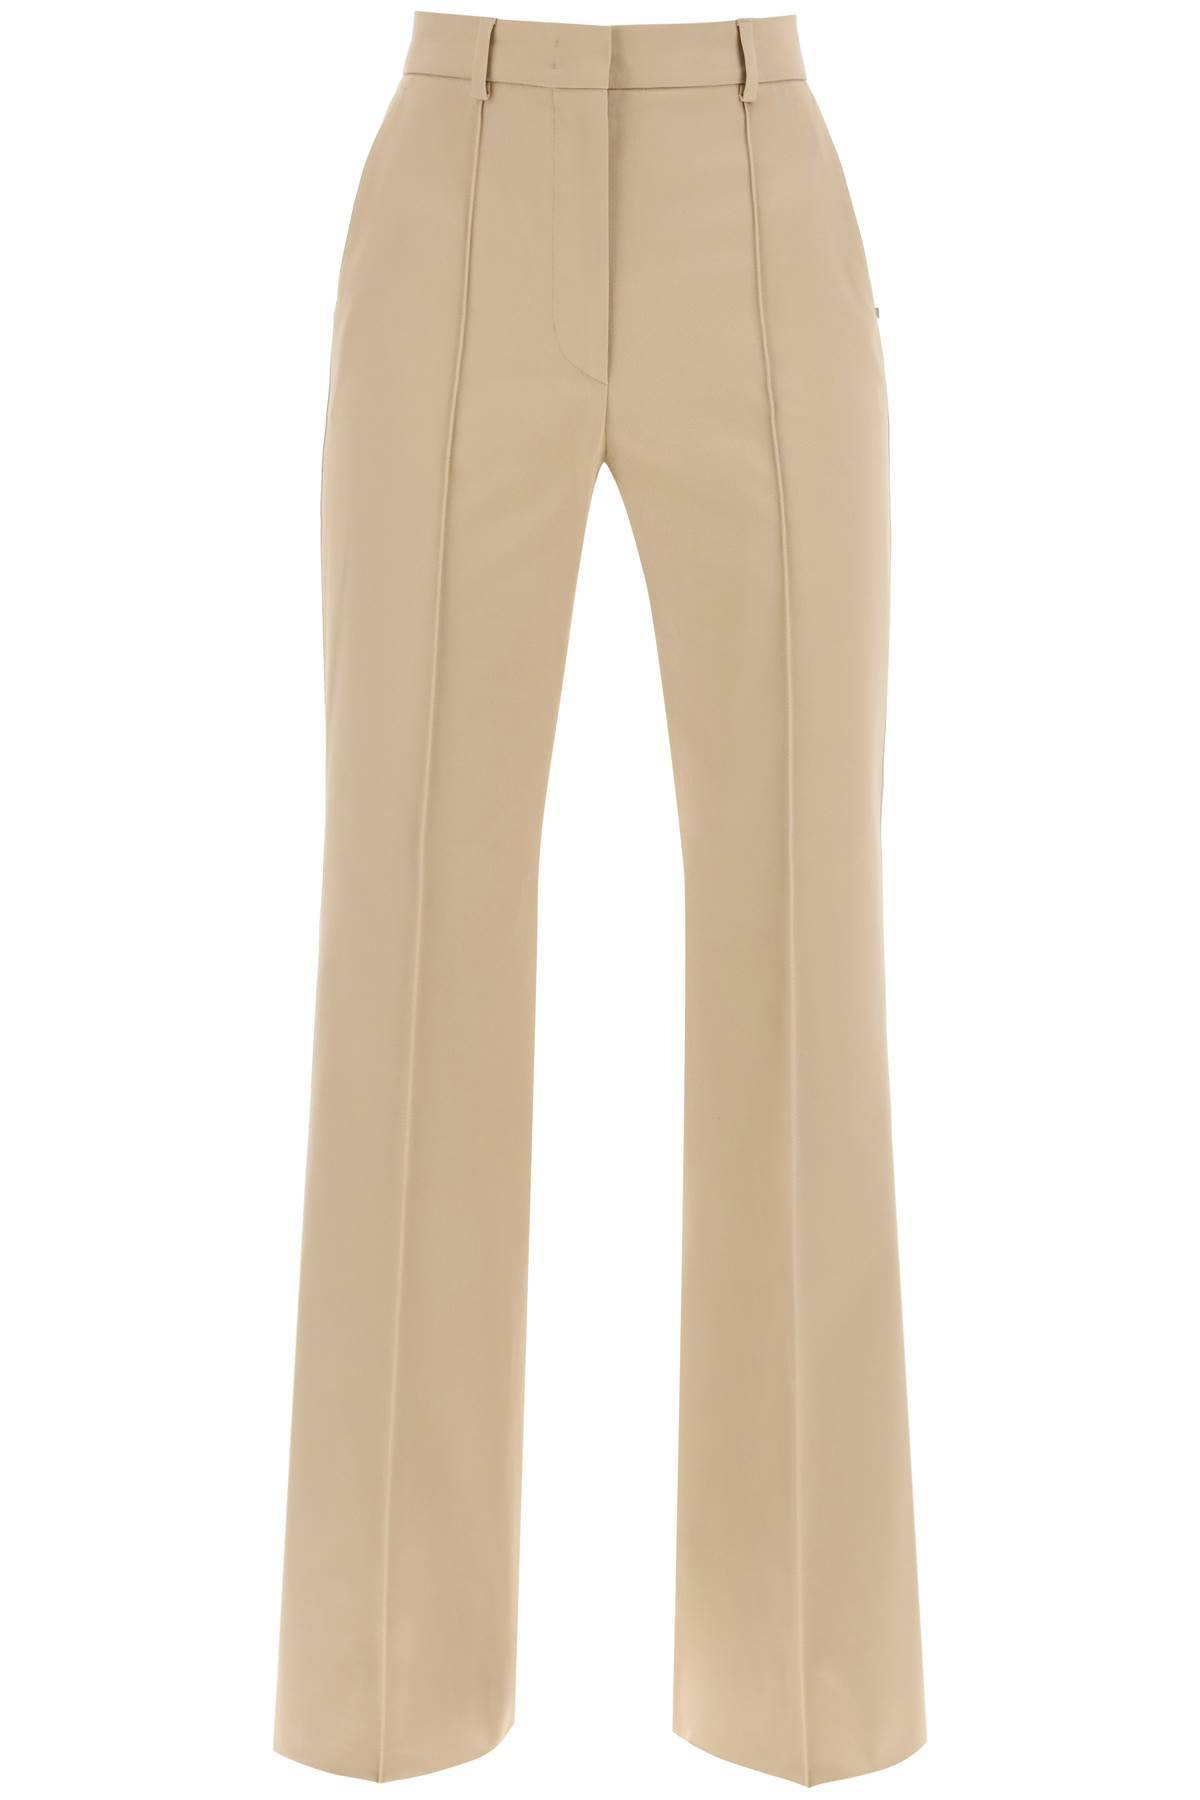 Sportmax SPORTMAX flared pants from nor